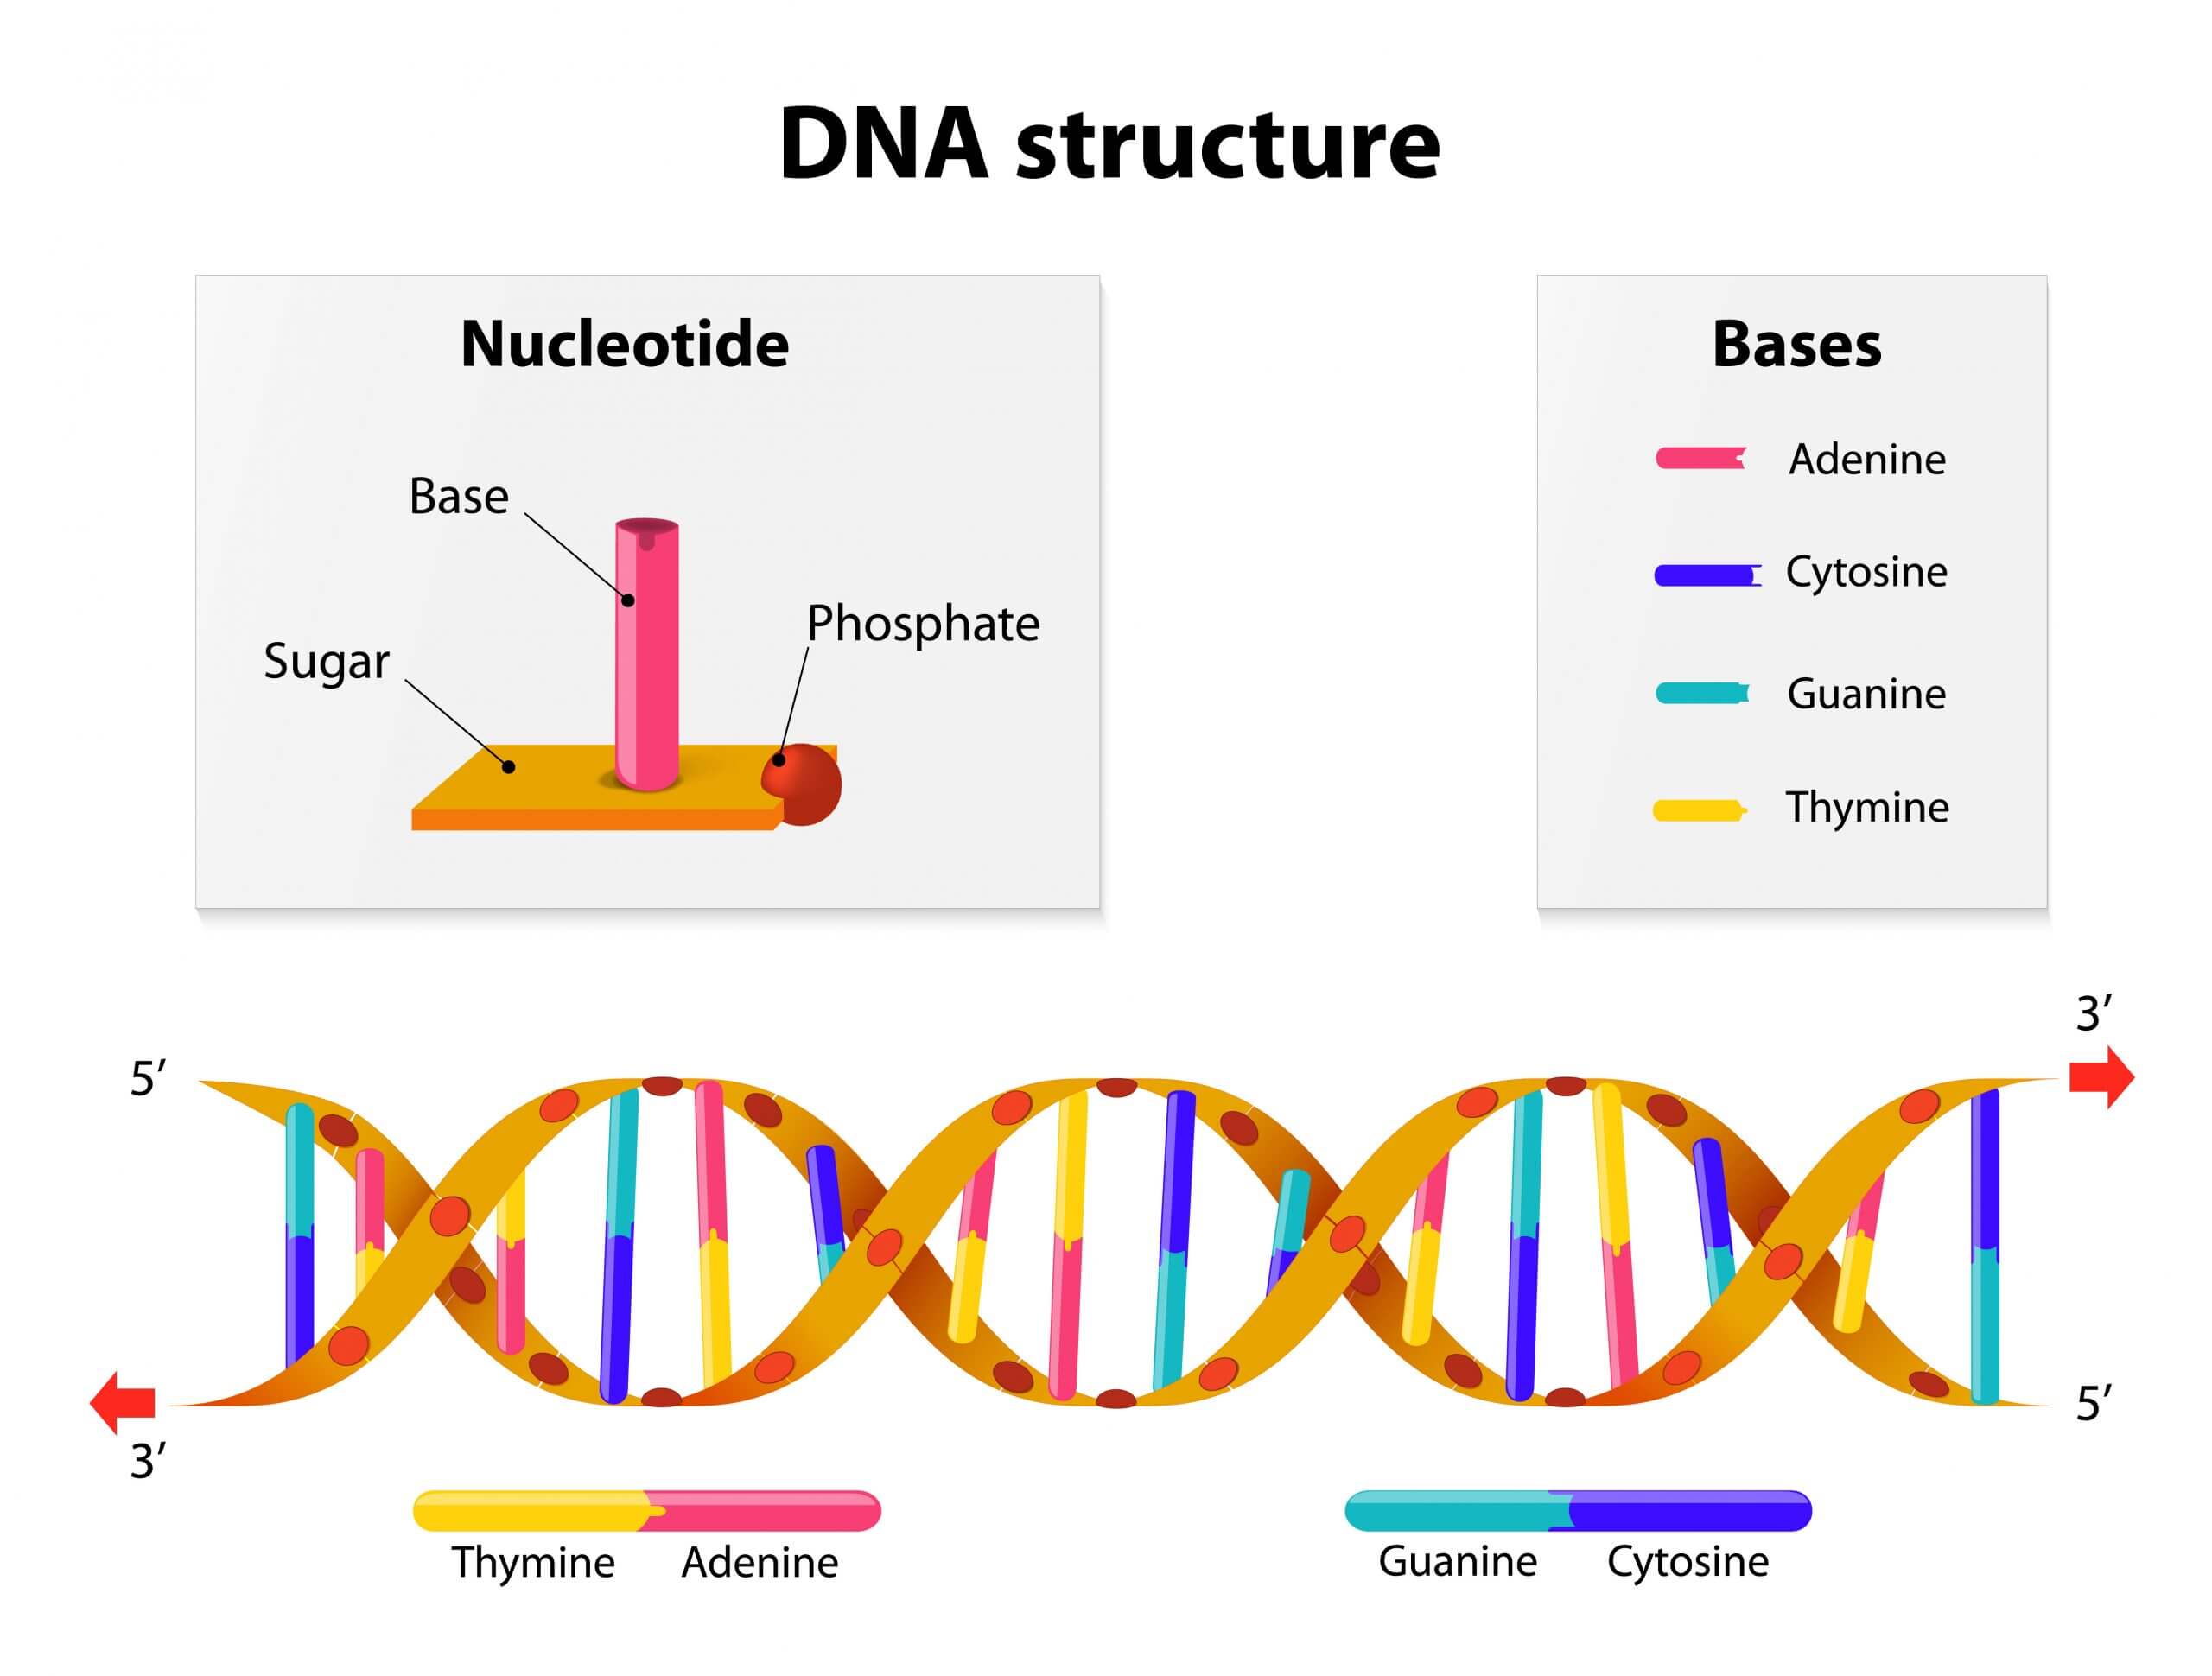 April 25, 1953: Celebrating the National DNA Day - Discovery of the Double Helix Structure